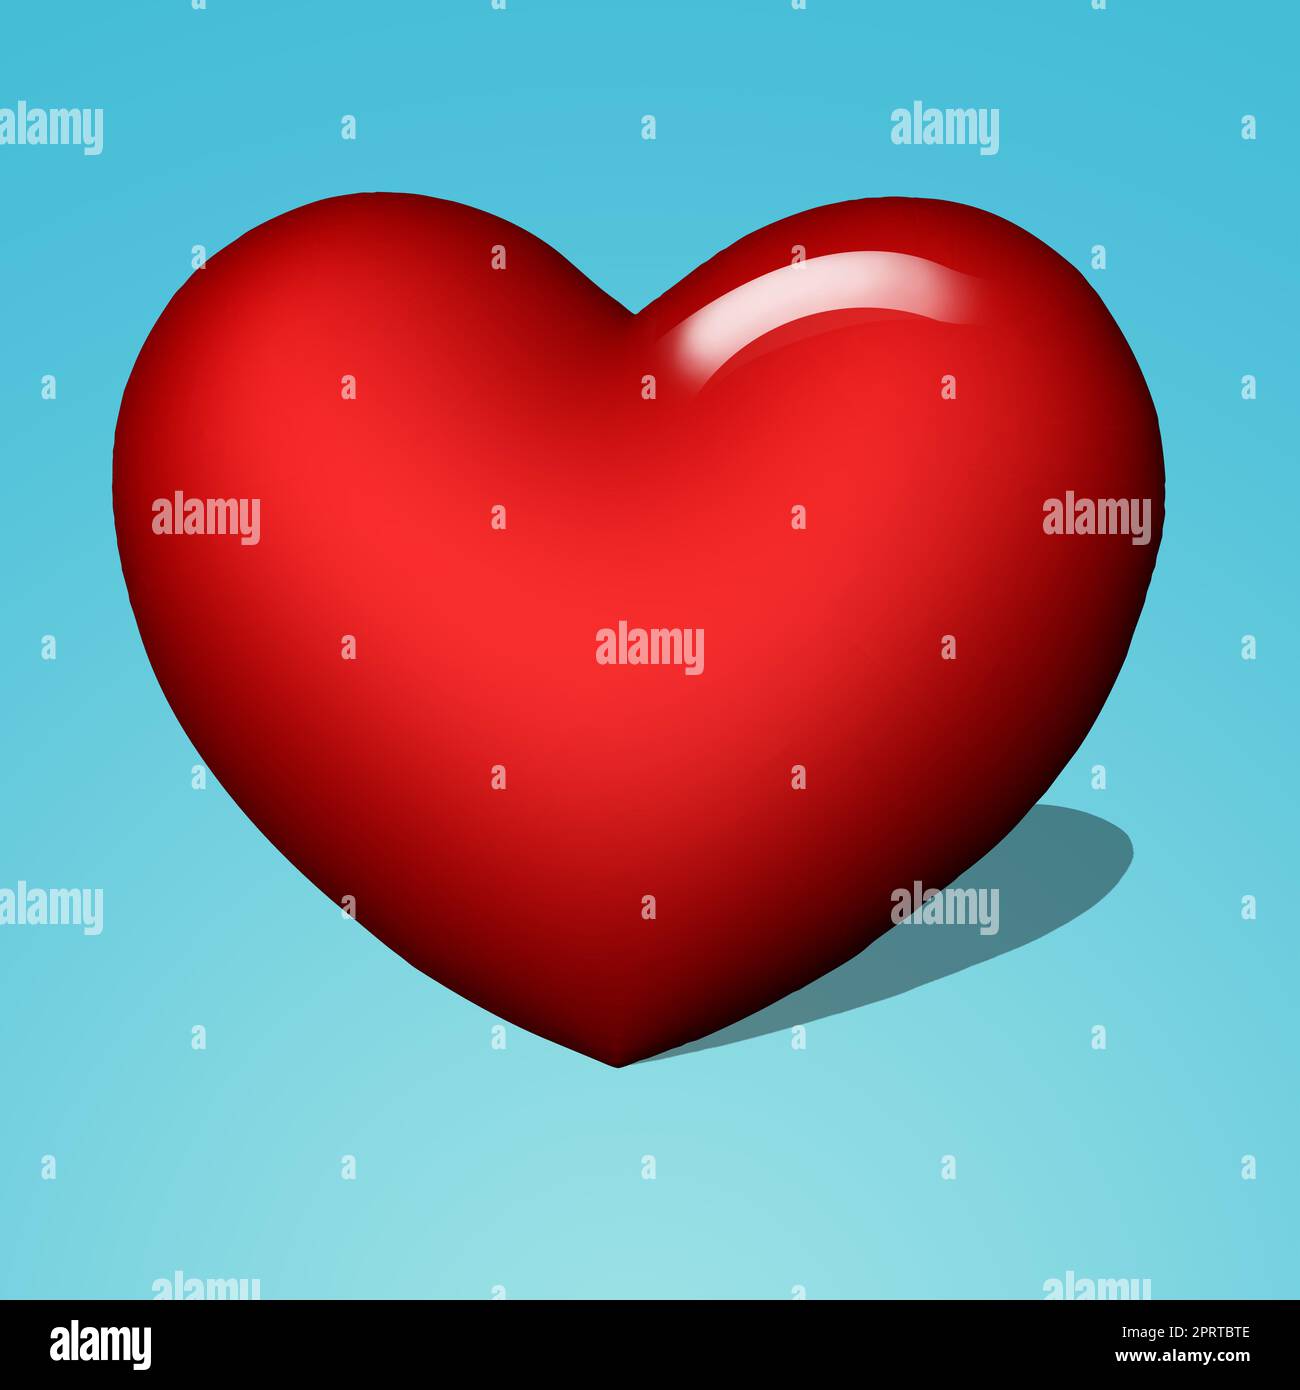 Love can make your heart 10 sizes larger. A graphic illustration of hearts. Stock Photo